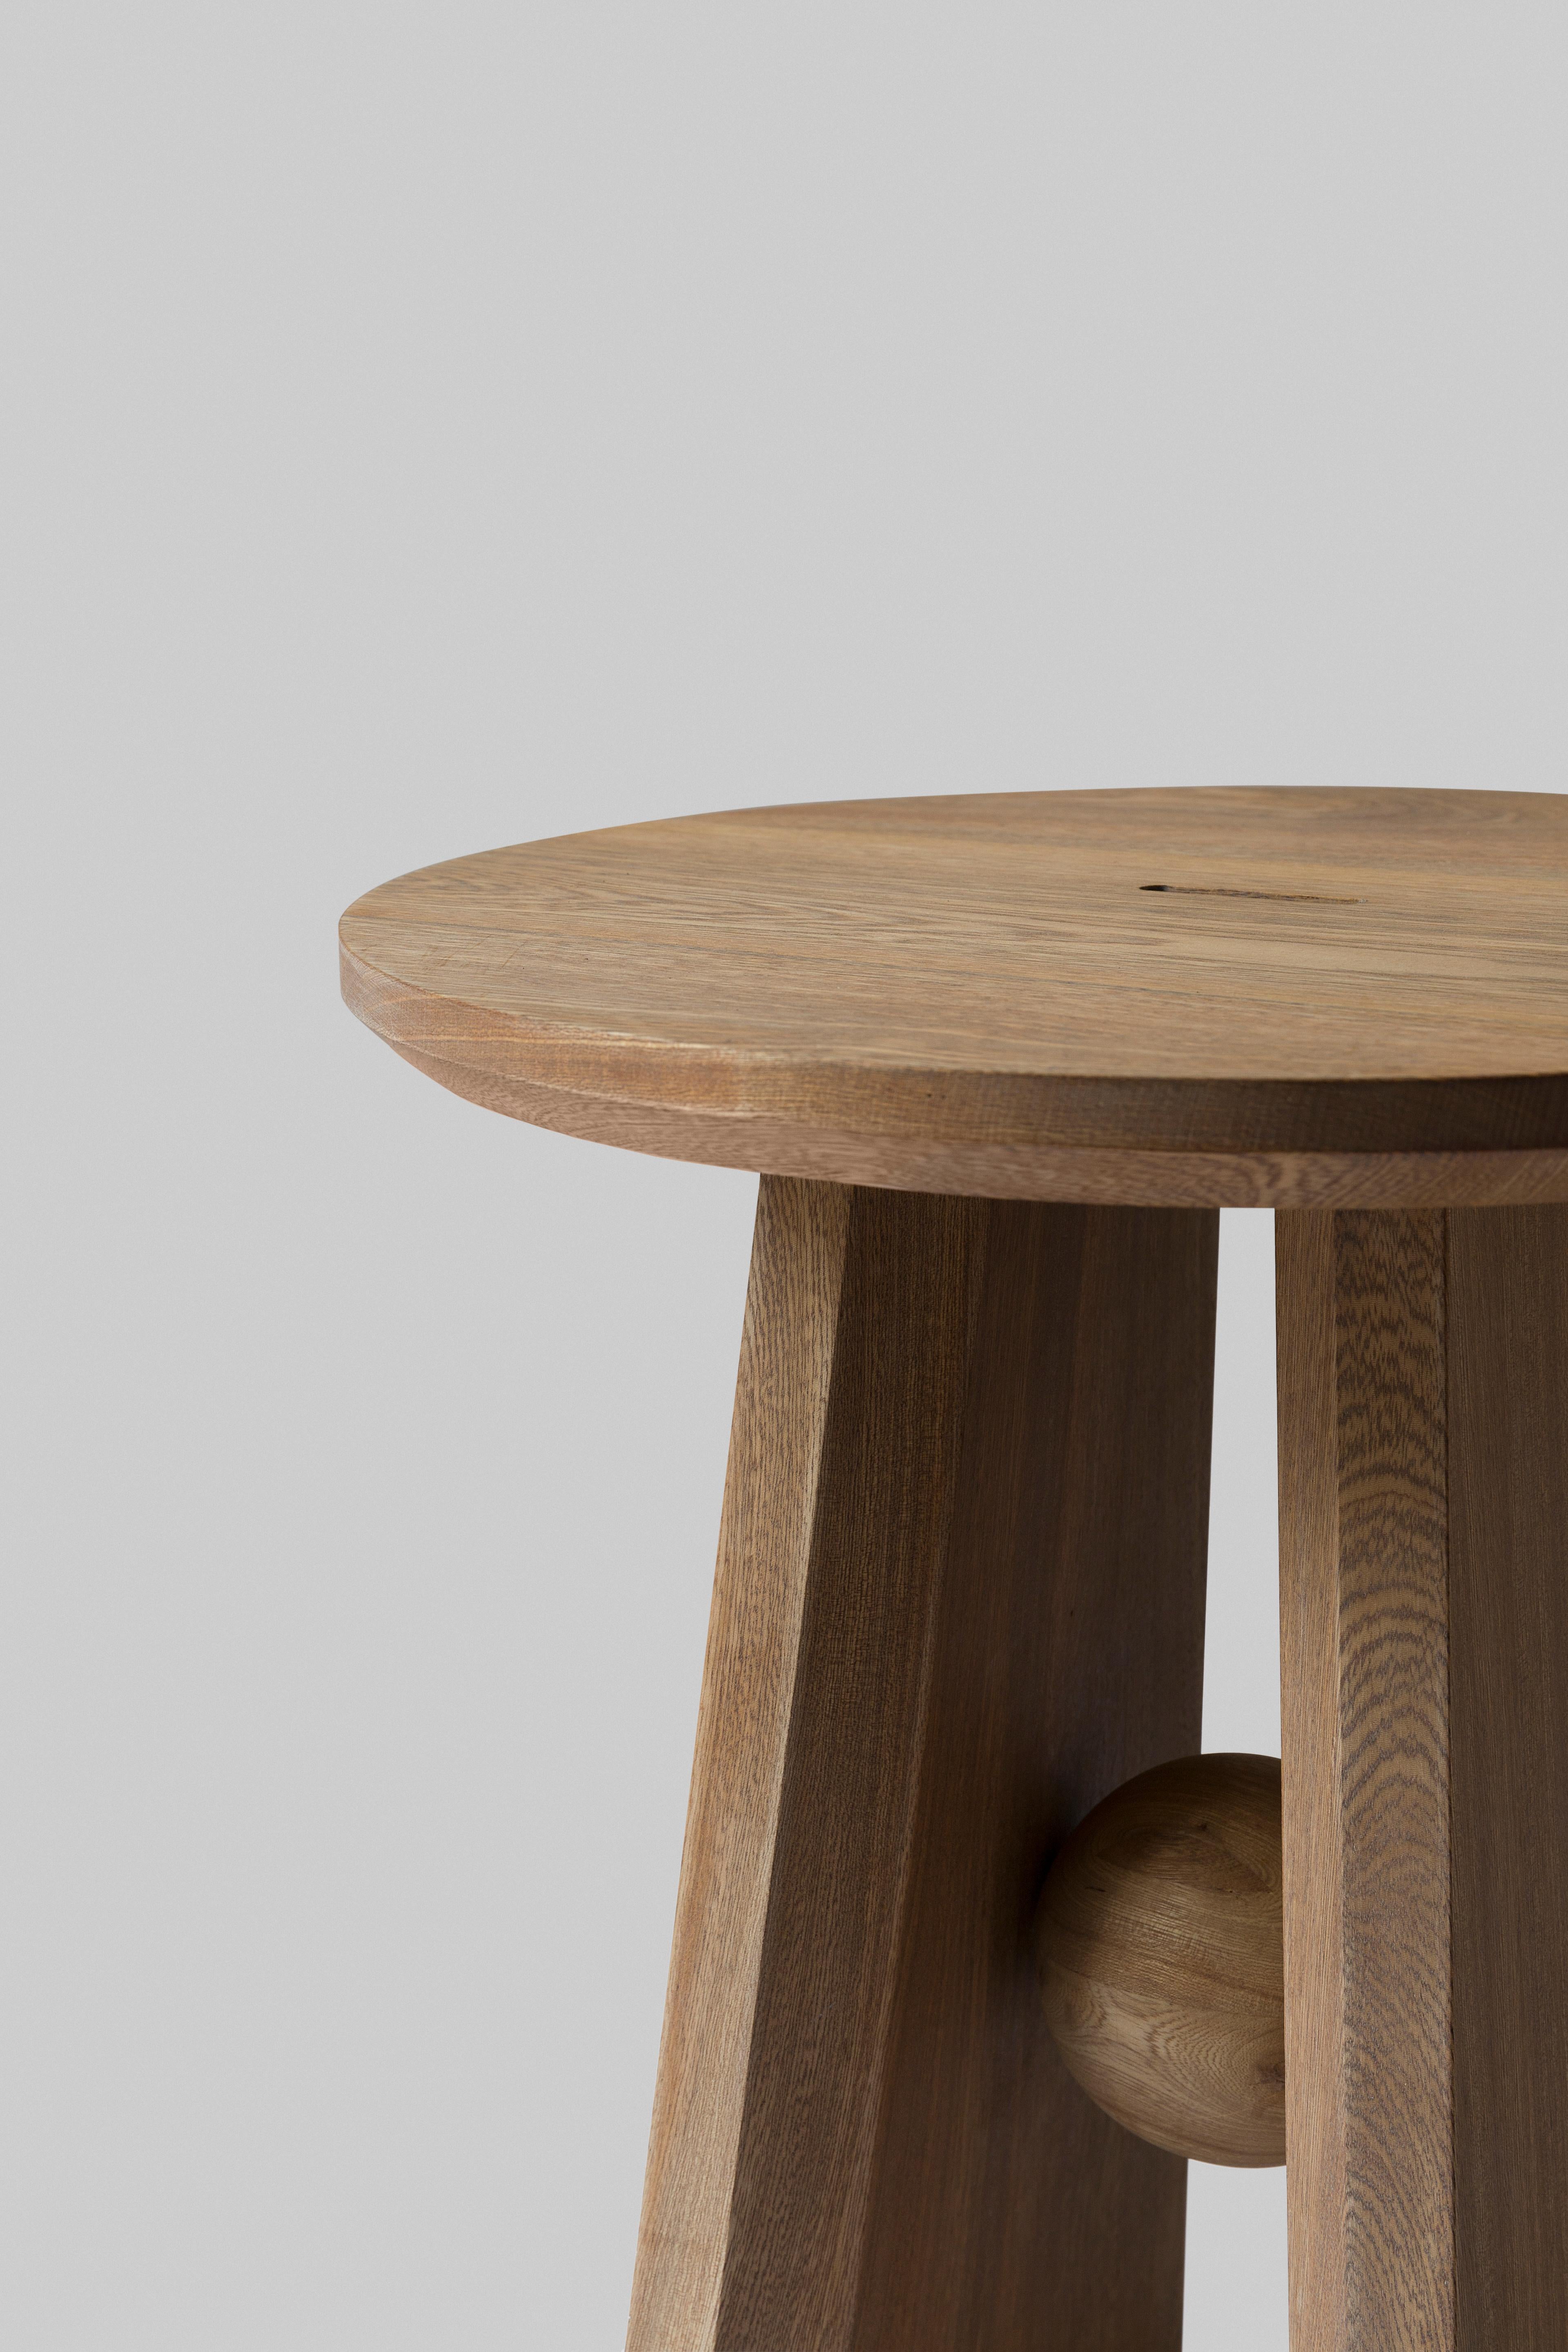 Basurto 01 Contemporary Wooden and Fabric Stool In New Condition For Sale In Mexico City, MX